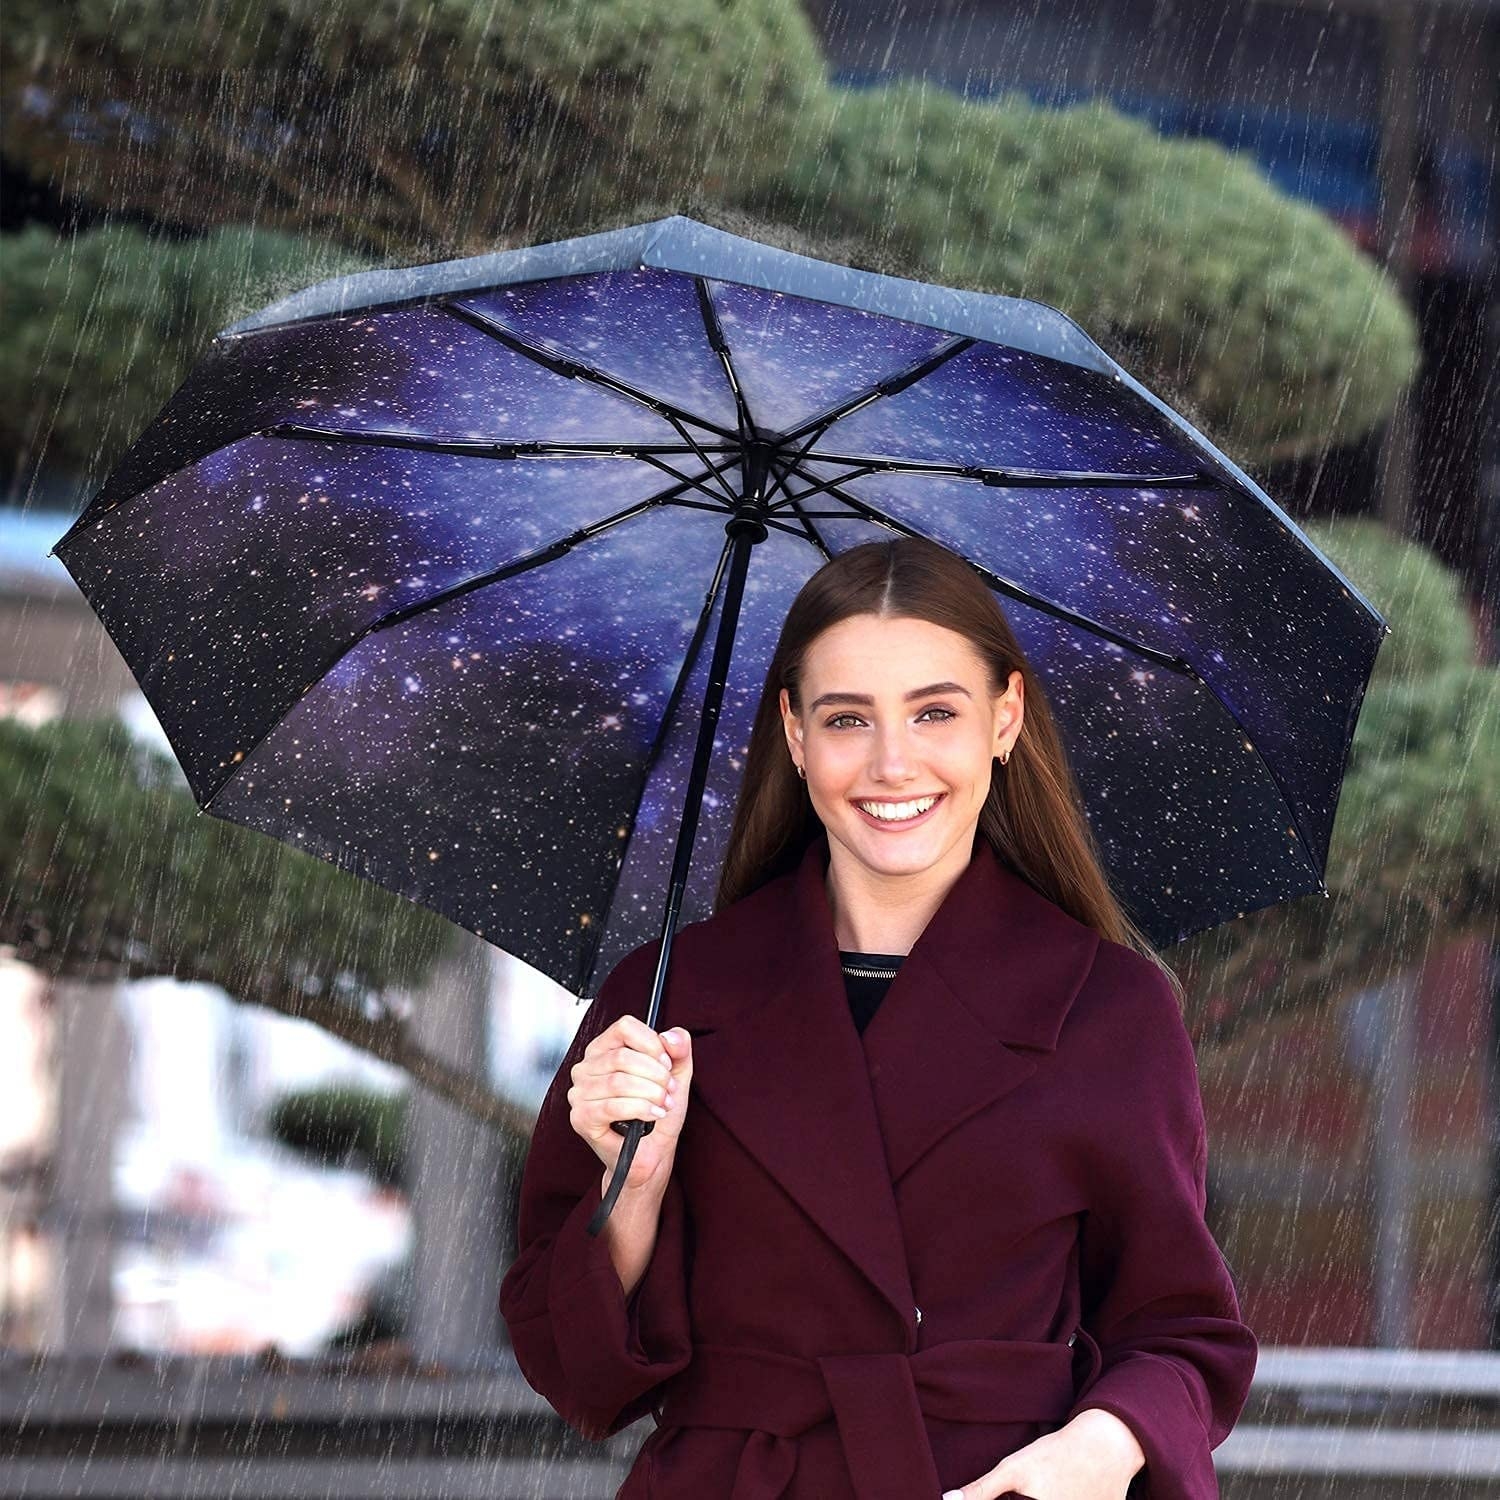 a person holding the umbrella while standing in the rain